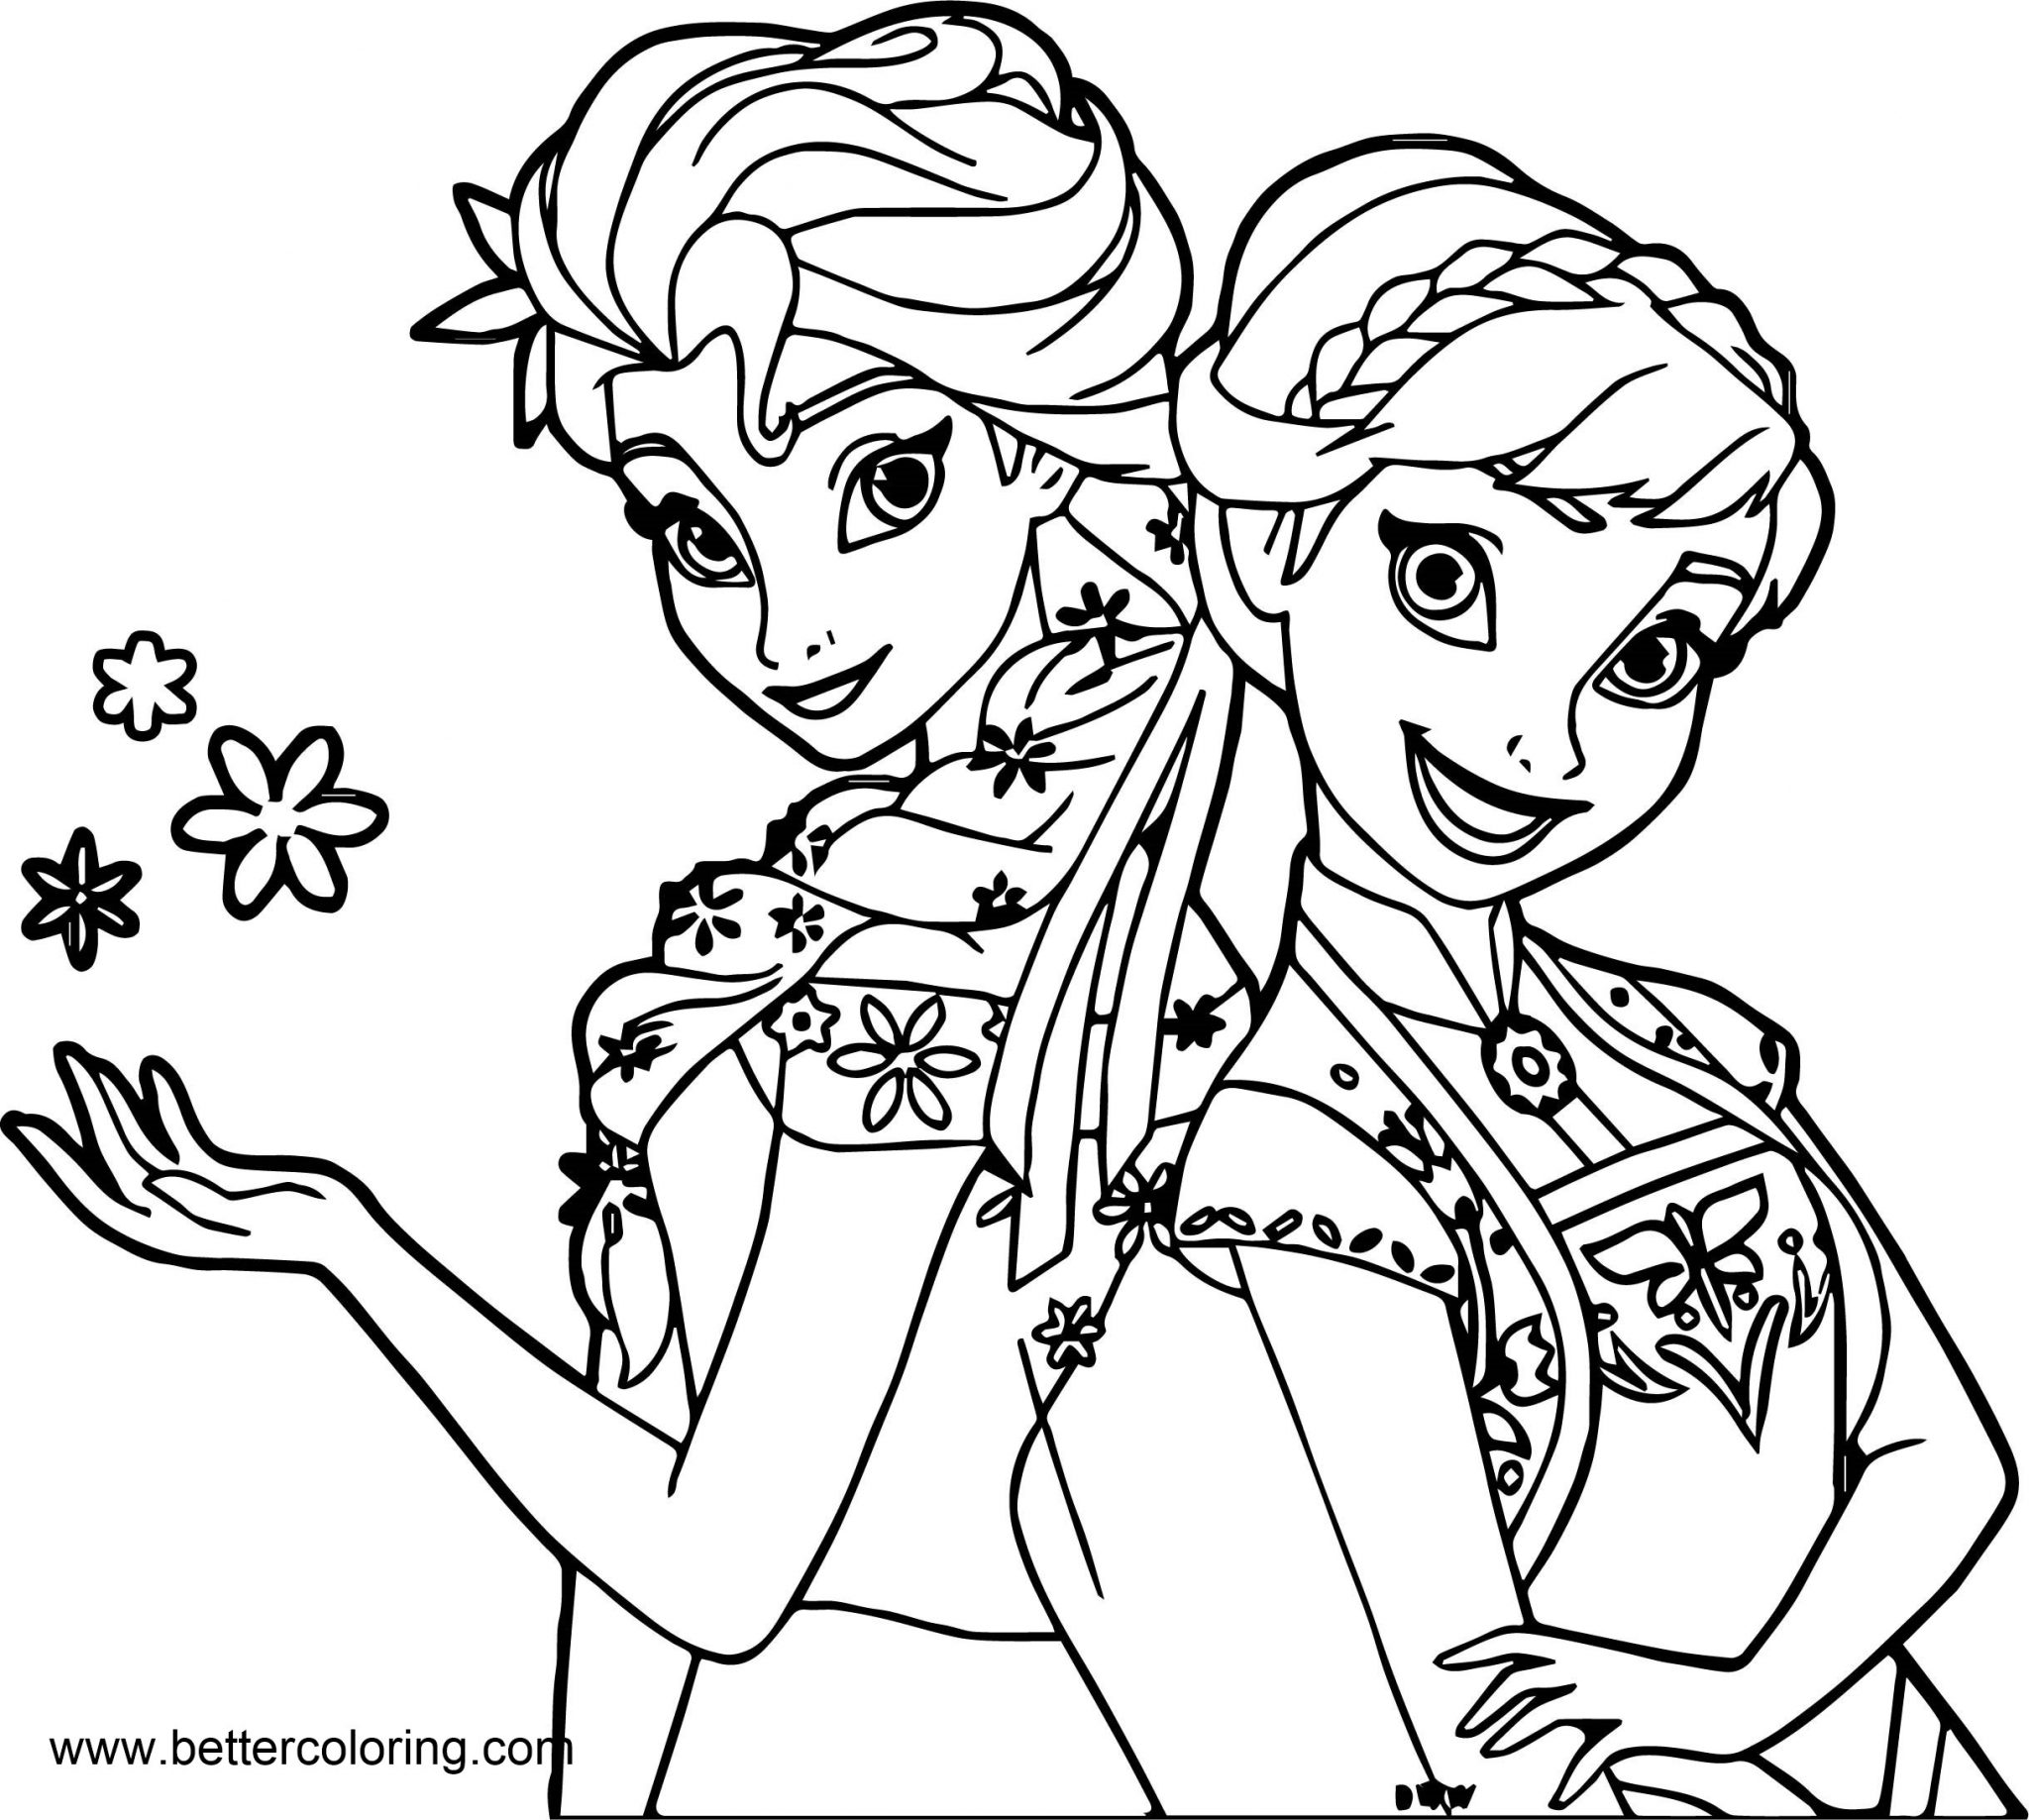 Frozen Elsa And Anna Coloring Pages Free Printable Coloring Pages